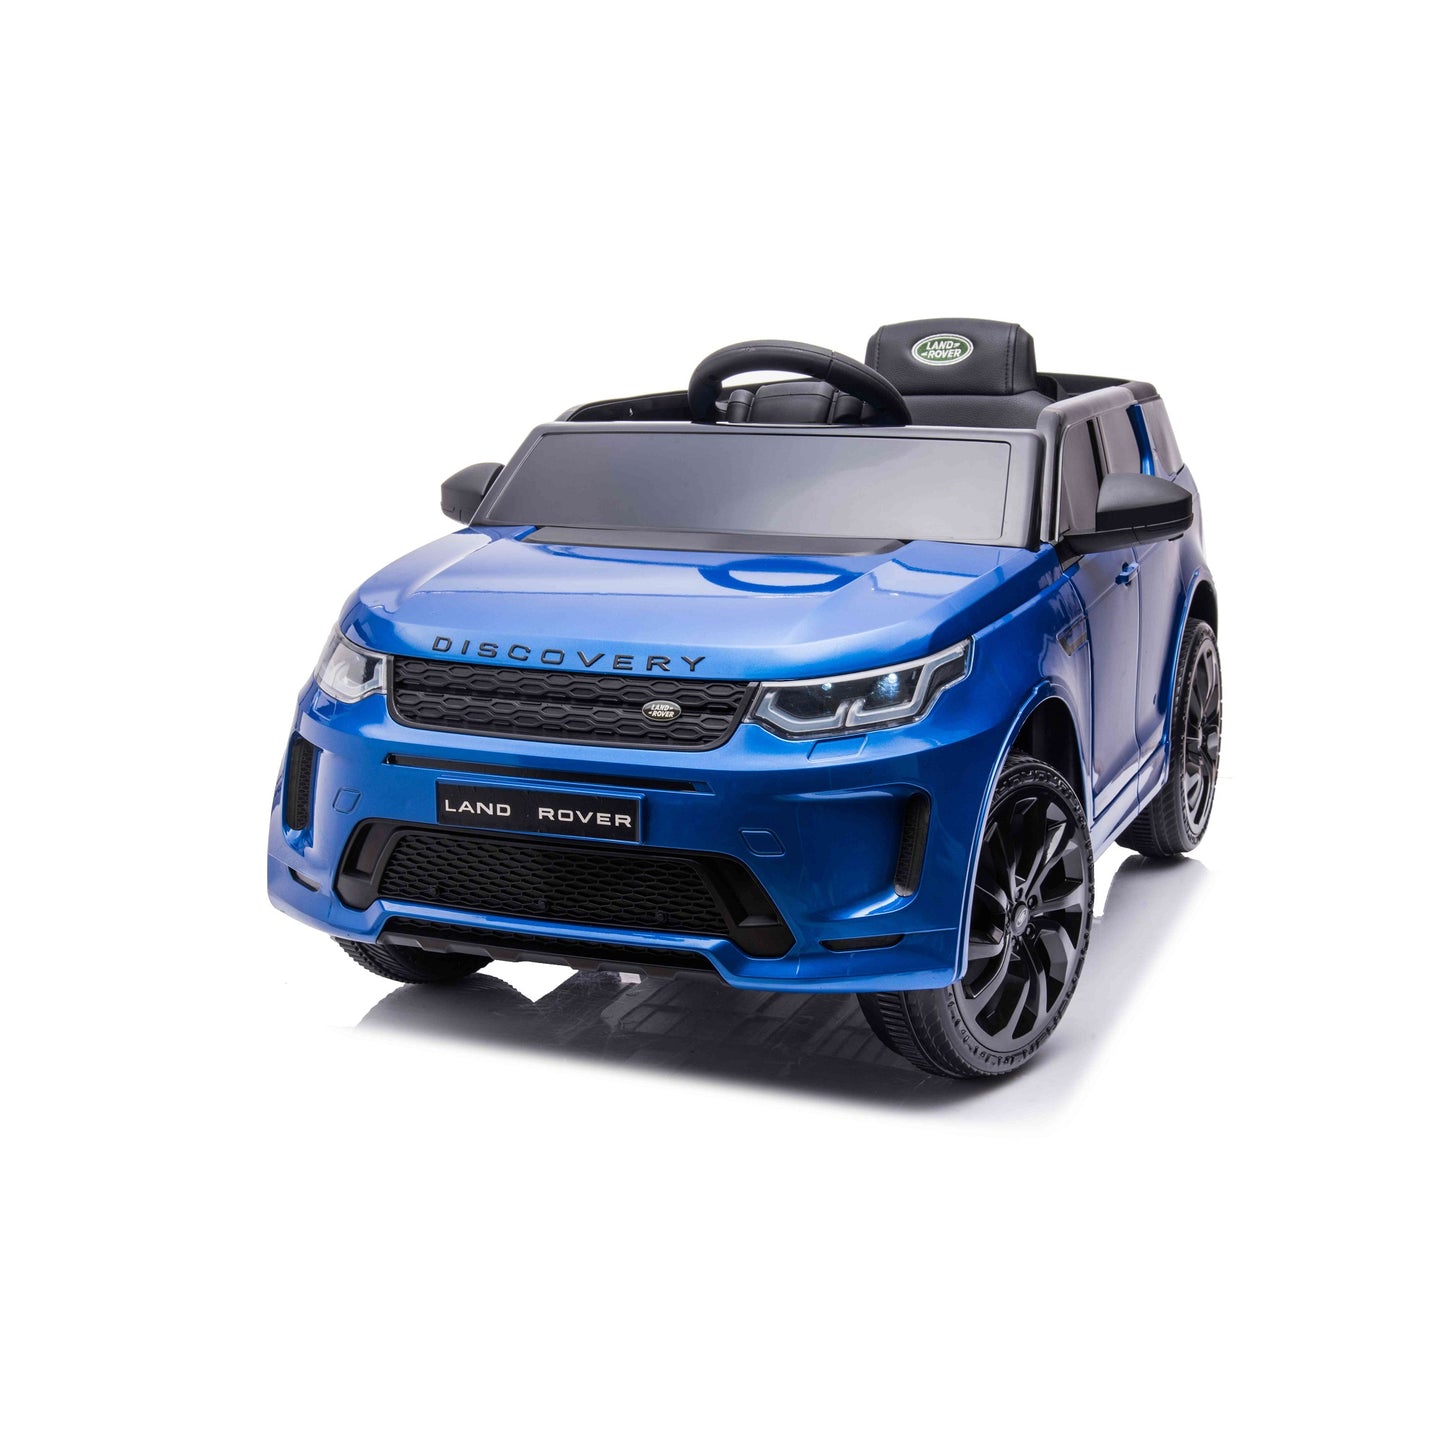 Licensed Range Discovery Sport 12v Kids Ride on Car with Remote - Metallic Blue